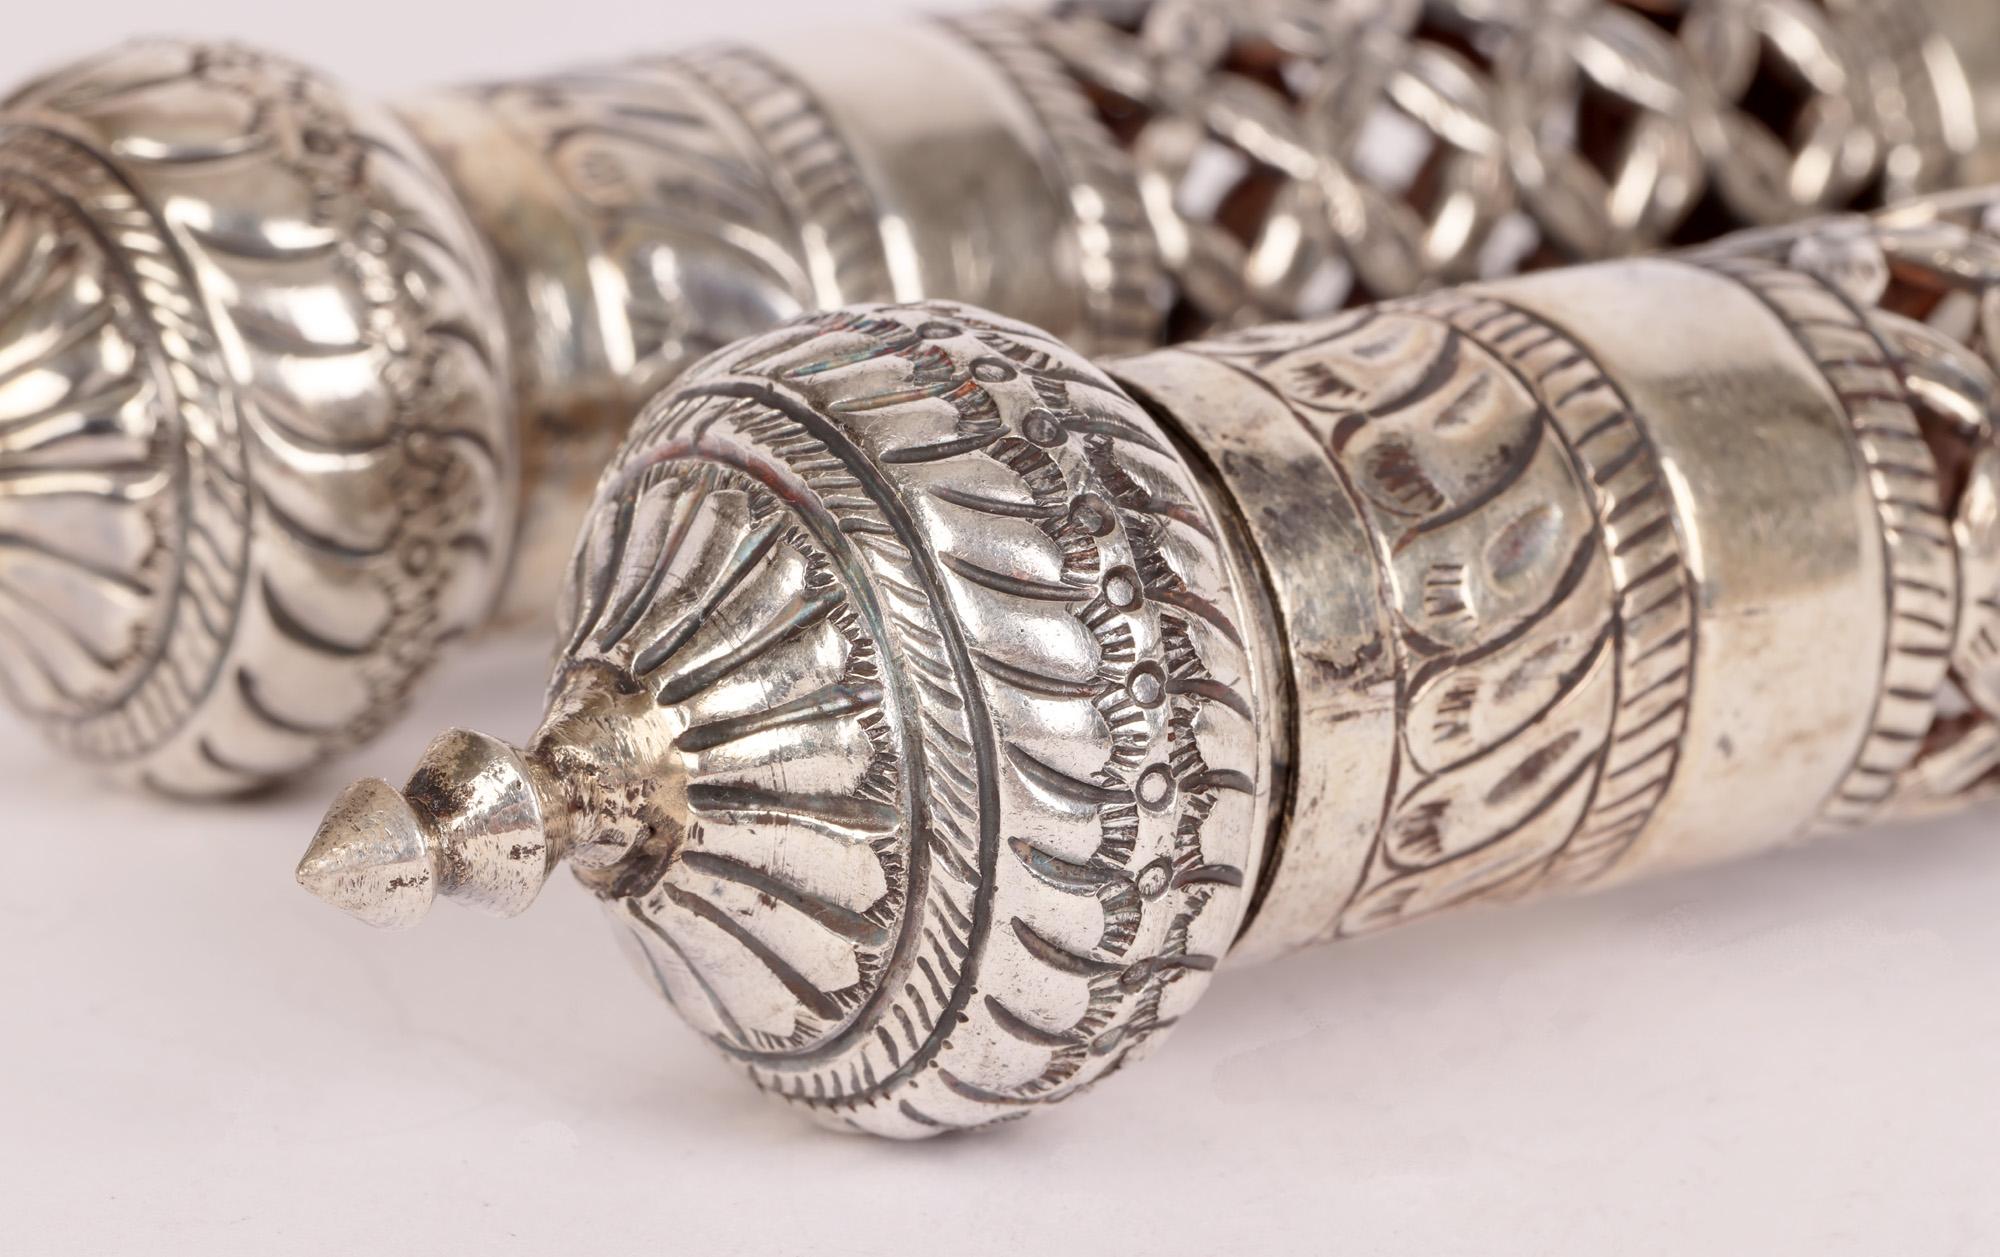 A fine pair vintage Omani silver pierced scroll or document holders believed to date to the early to mid 20th century. The scroll holders are of long hollow cylindrical shape with decorative finials to either end, one doubling up as a removable cap